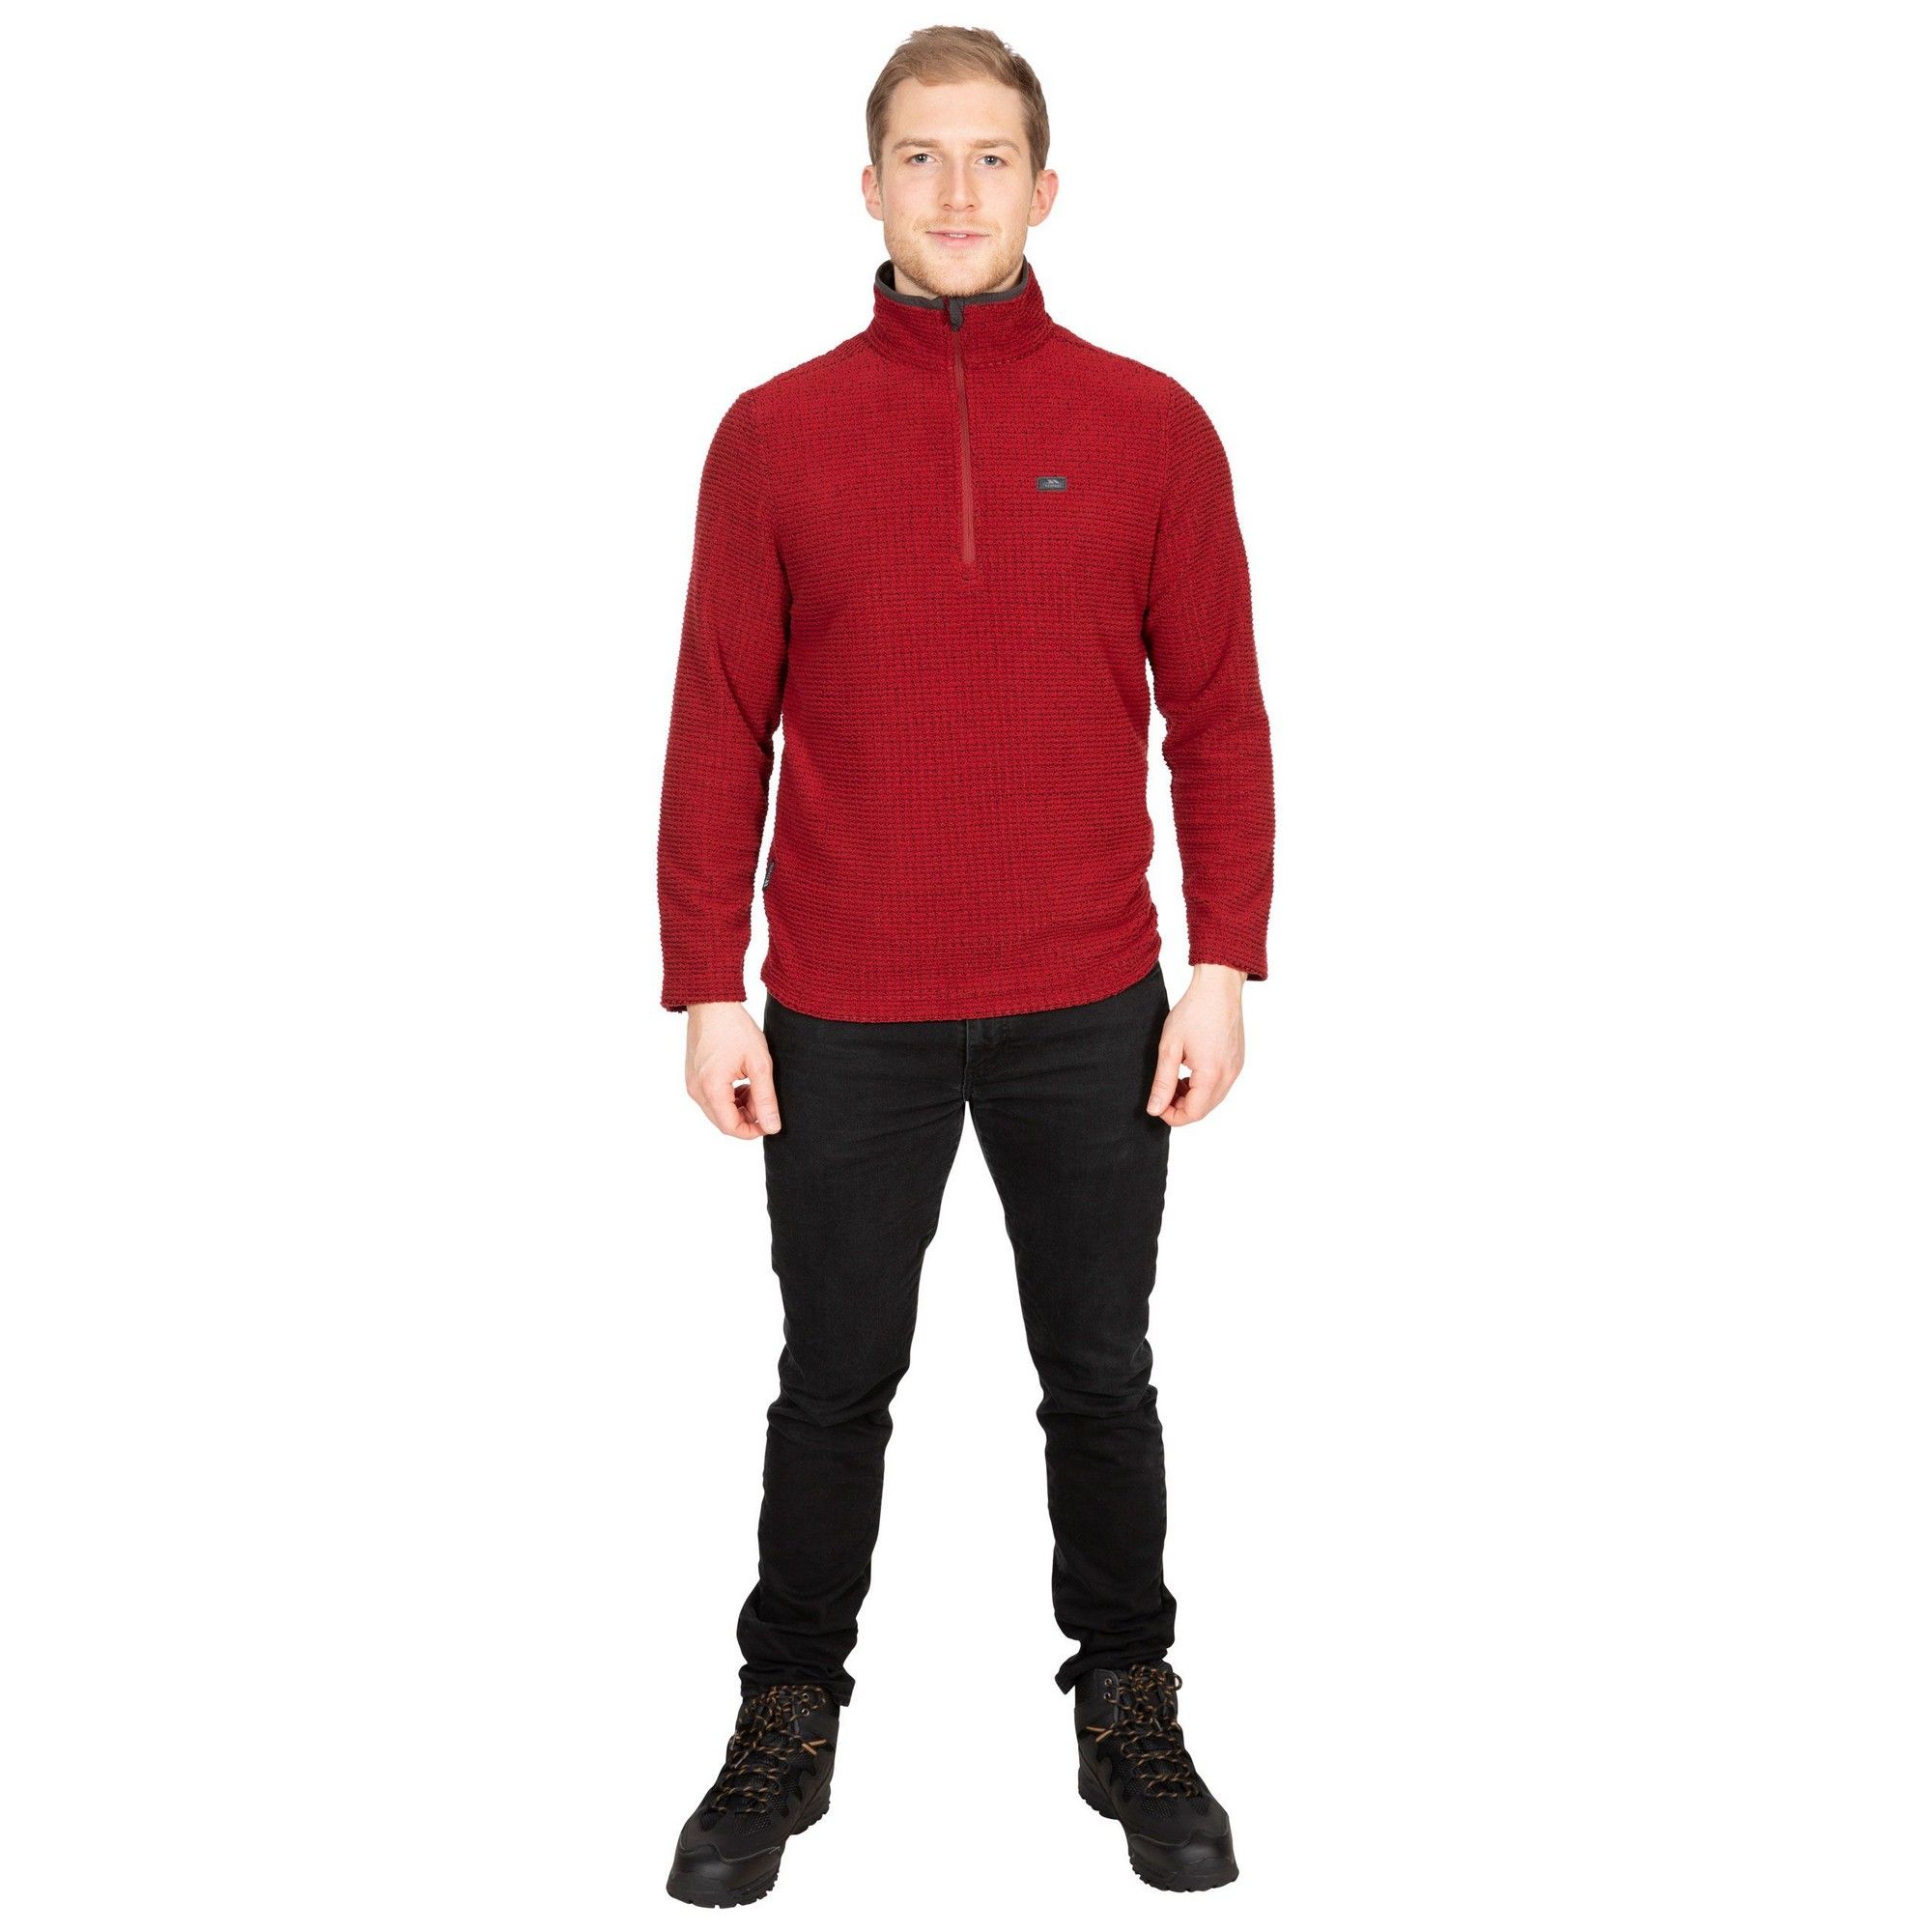 Shell: 100% Polyester fleece, Facings: 96% Polyester/4% Elastane. Textured fleece. 1/2 zip neck. Chin guard. Airtrap. 220gsm. Trespass Mens Chest Sizing (approx): S - 35-37in/89-94cm, M - 38-40in/96.5-101.5cm, L - 41-43in/104-109cm, XL - 44-46in/111.5-117cm, XXL - 46-48in/117-122cm, 3XL - 48-50in/122-127cm.